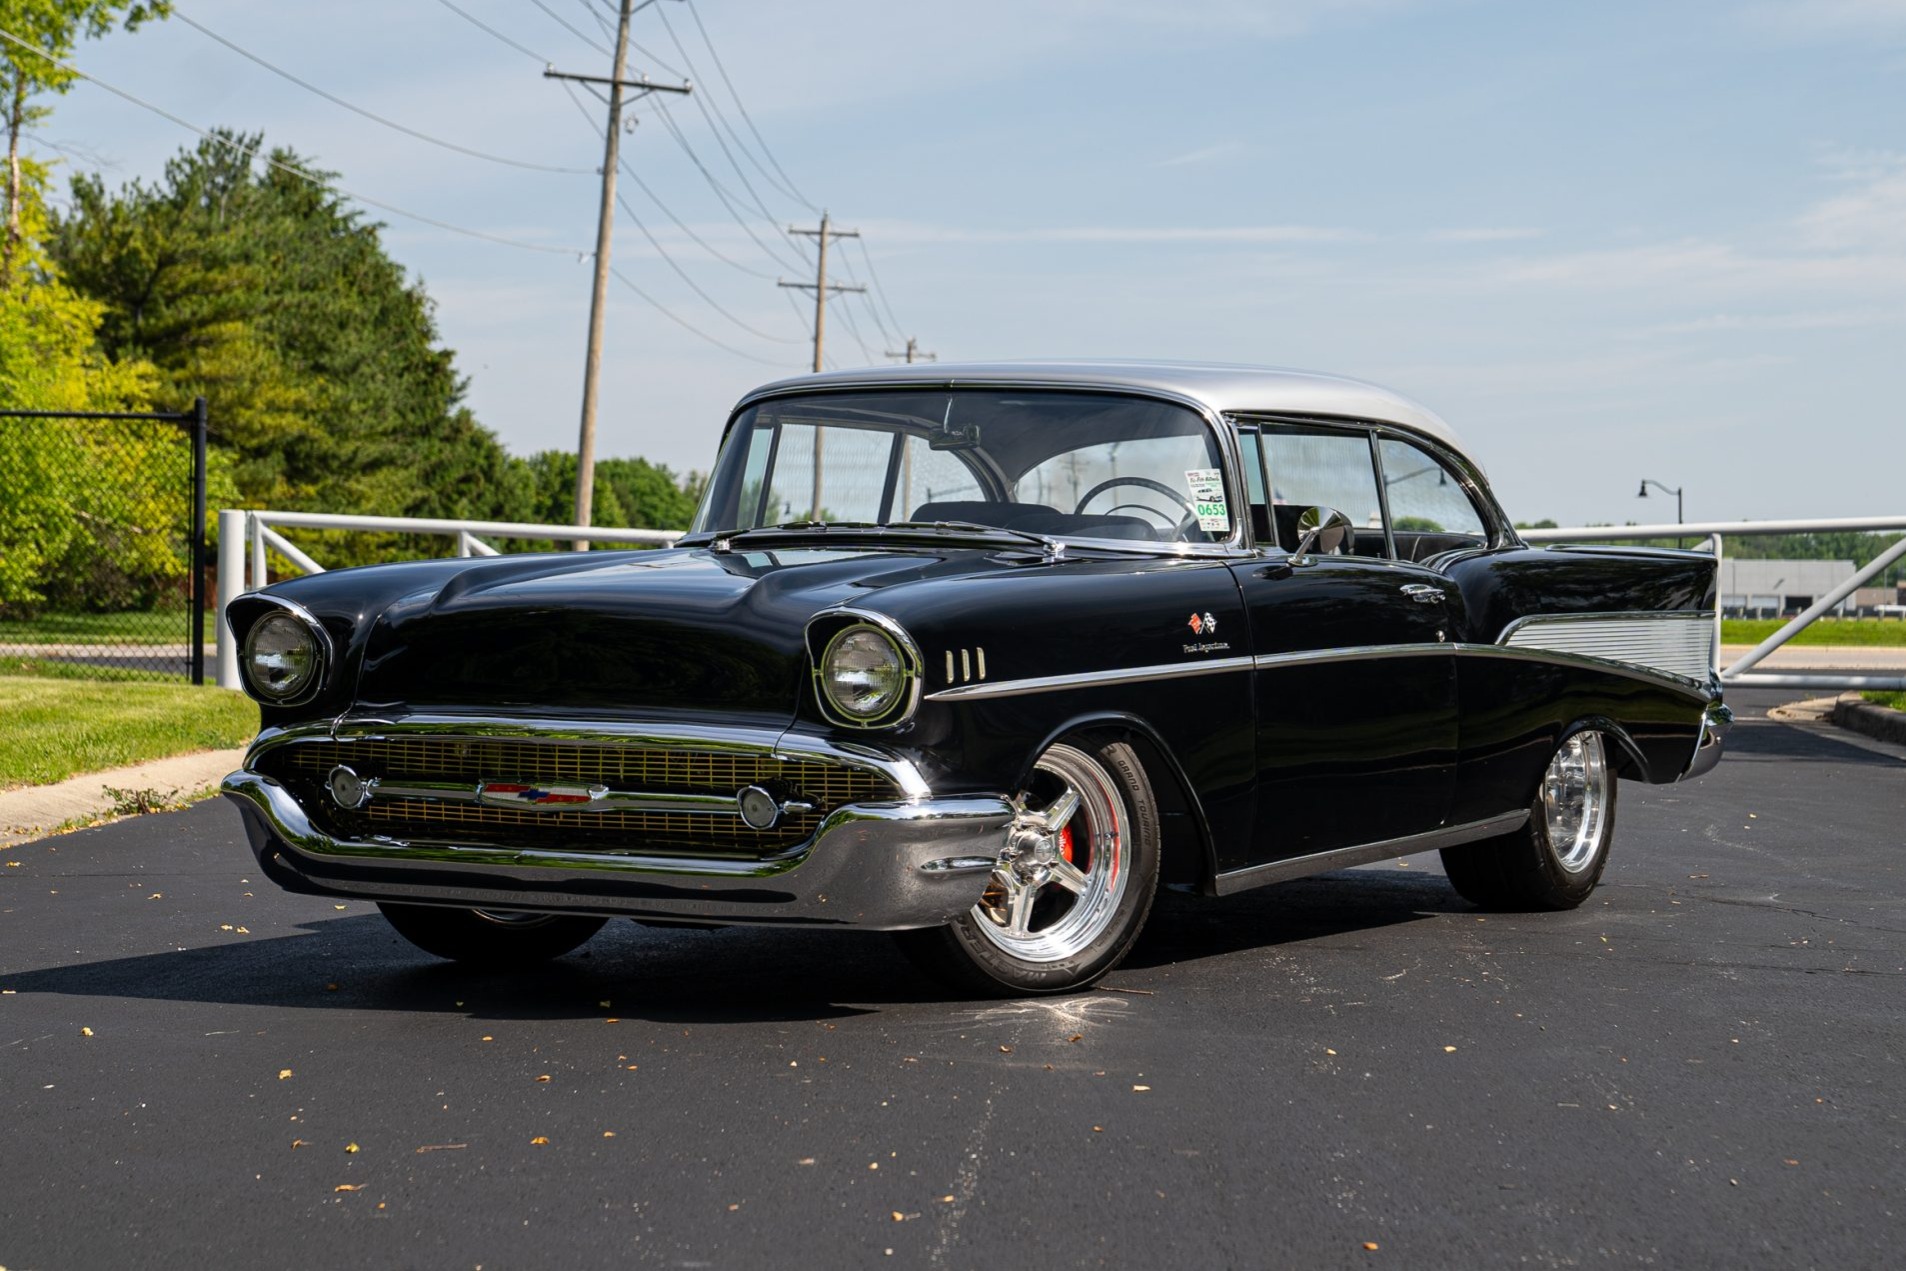 Used 454-Powered 1957 Chevrolet Bel Air Hardtop Review